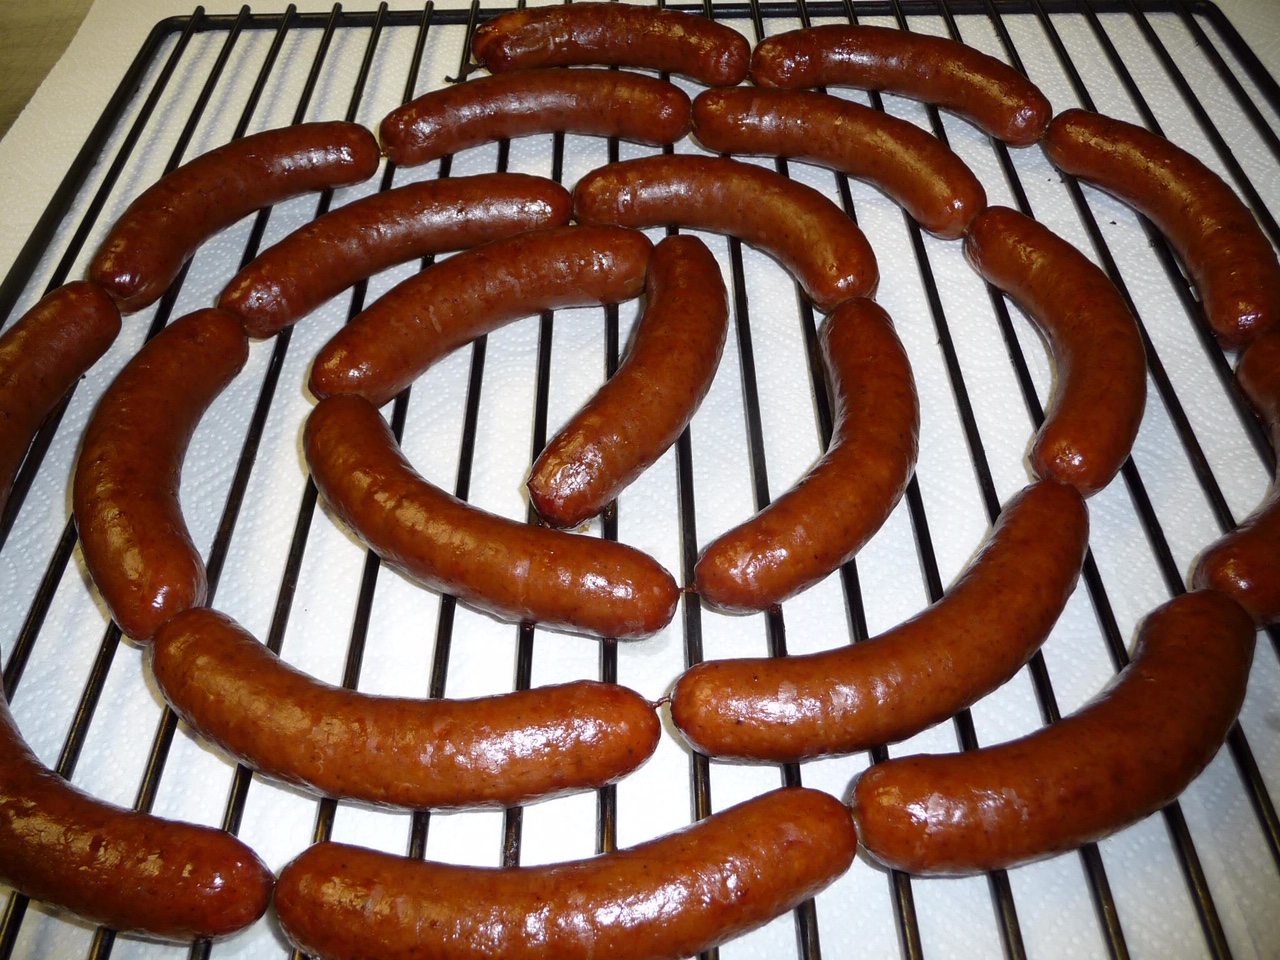 Sausages After Being Cooked on a Tray